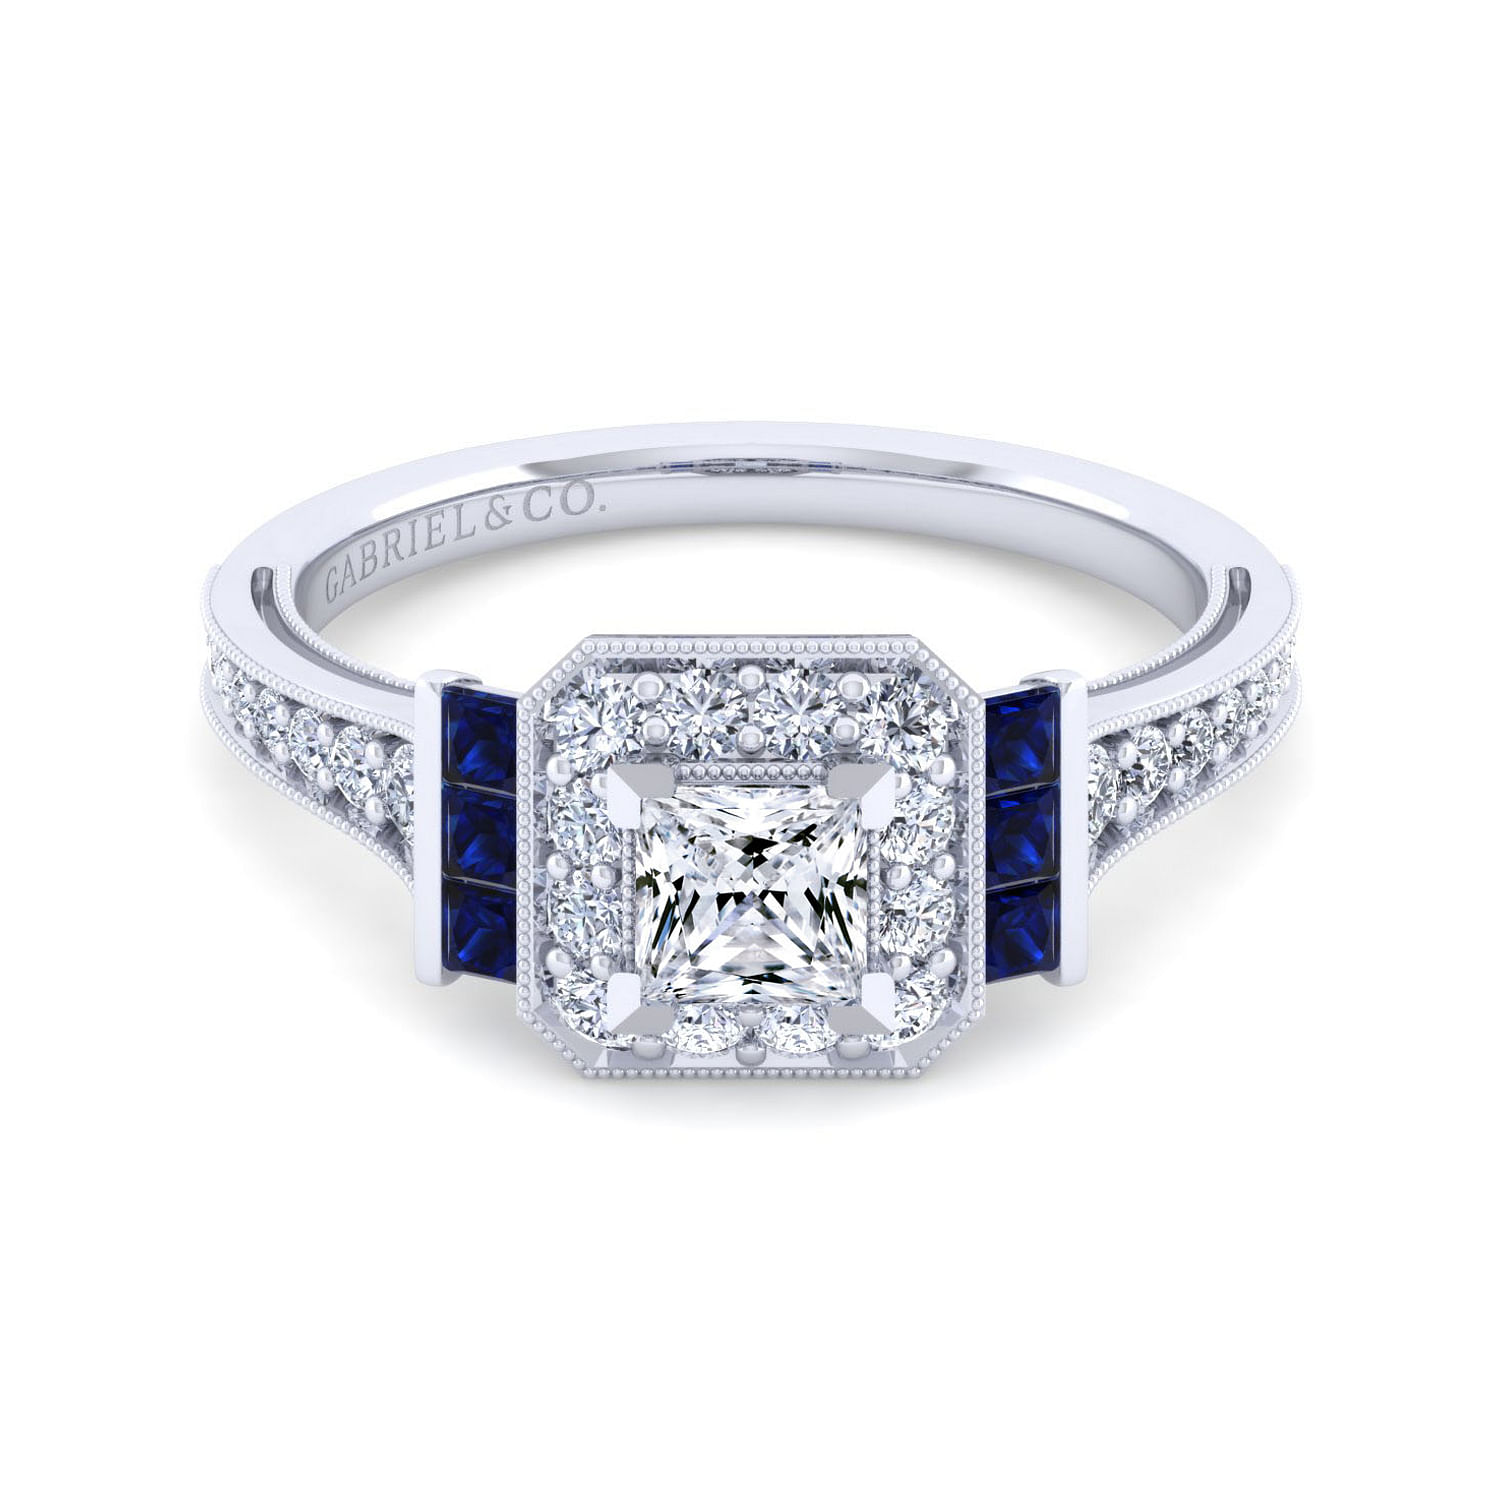 Sylvia - Vintage Inspired 14K White Gold Princess Halo Sapphire and Diamond Engagement Ring